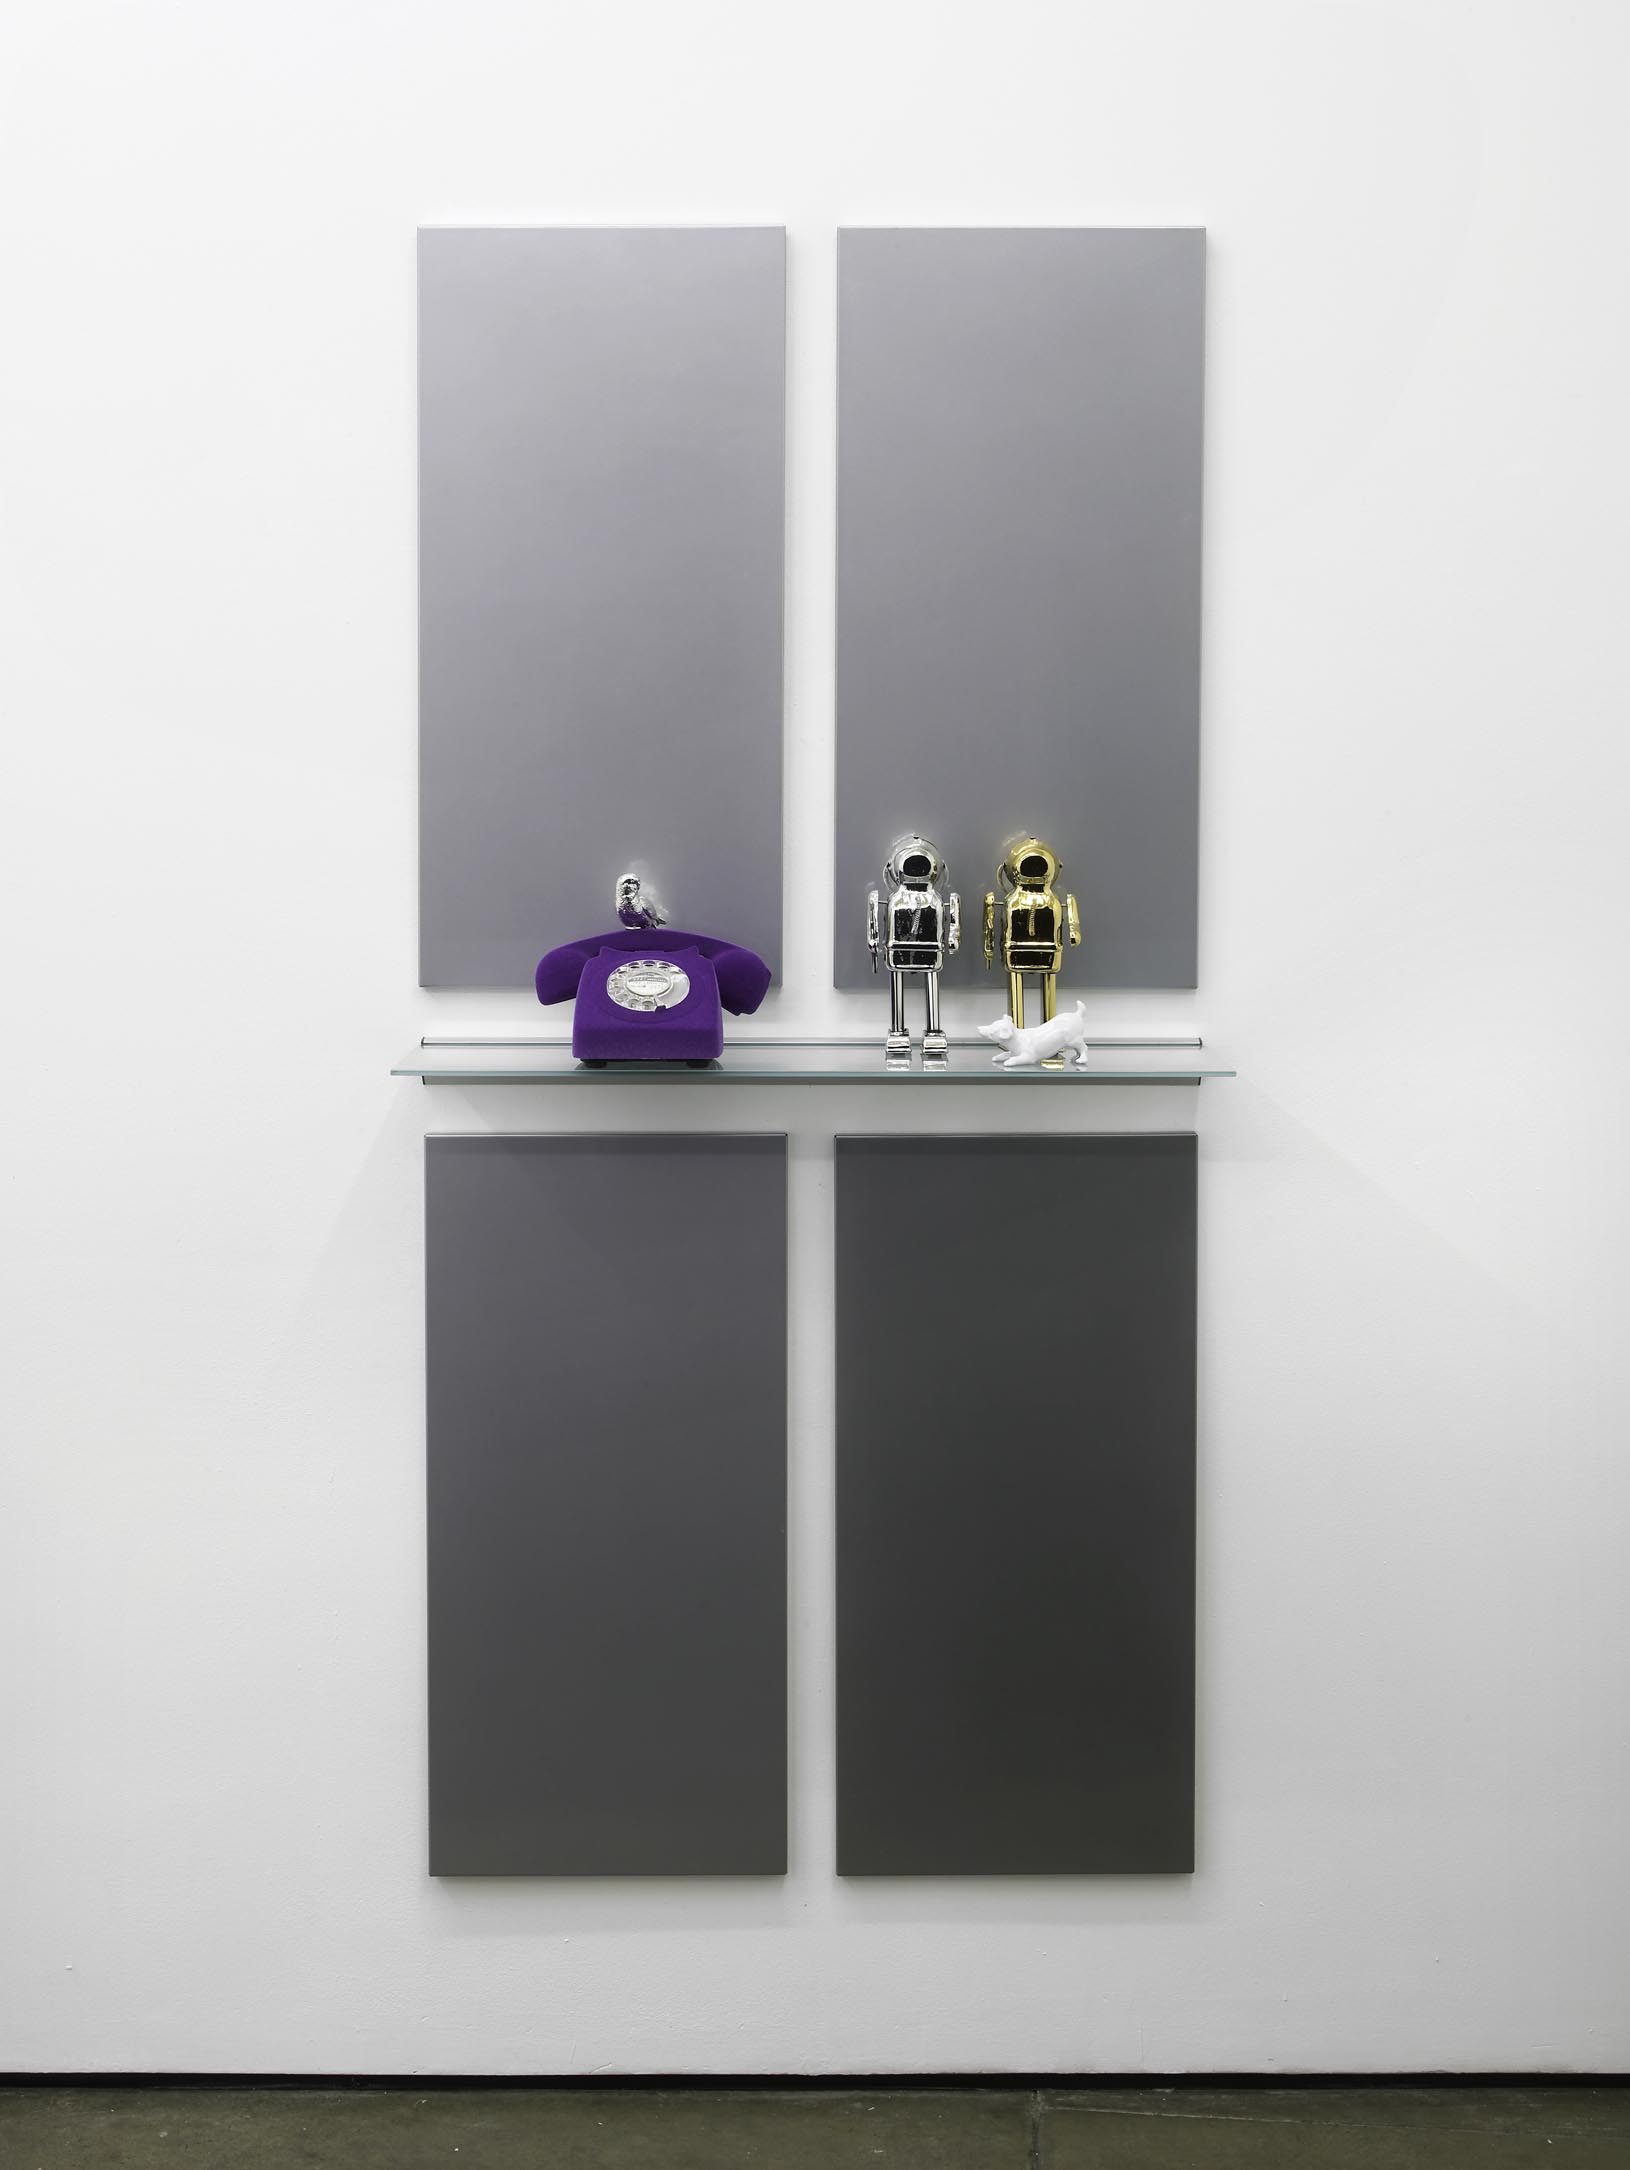     Matthew Darbyshire Untitled Homeware No. 12 2011 Chromed silver and gold toy robots, purple flocked telephone, painted white Beswick dog ornament, &nbsp;glass and steel support:&nbsp;172 x 80 x 16.5 cm 